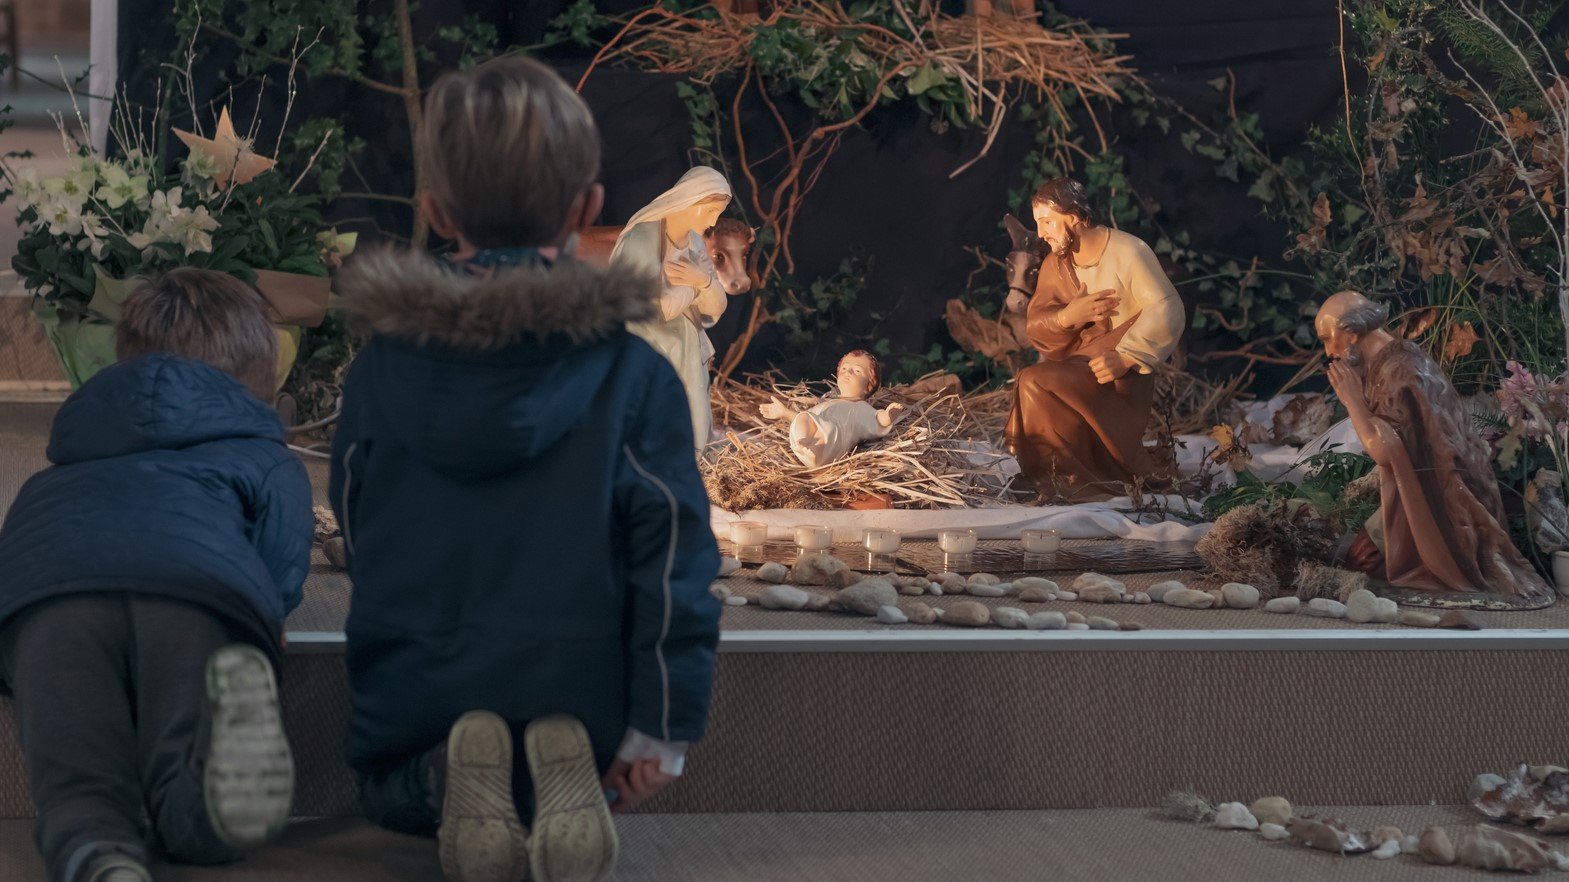 Young kids kneel before a nativity creche